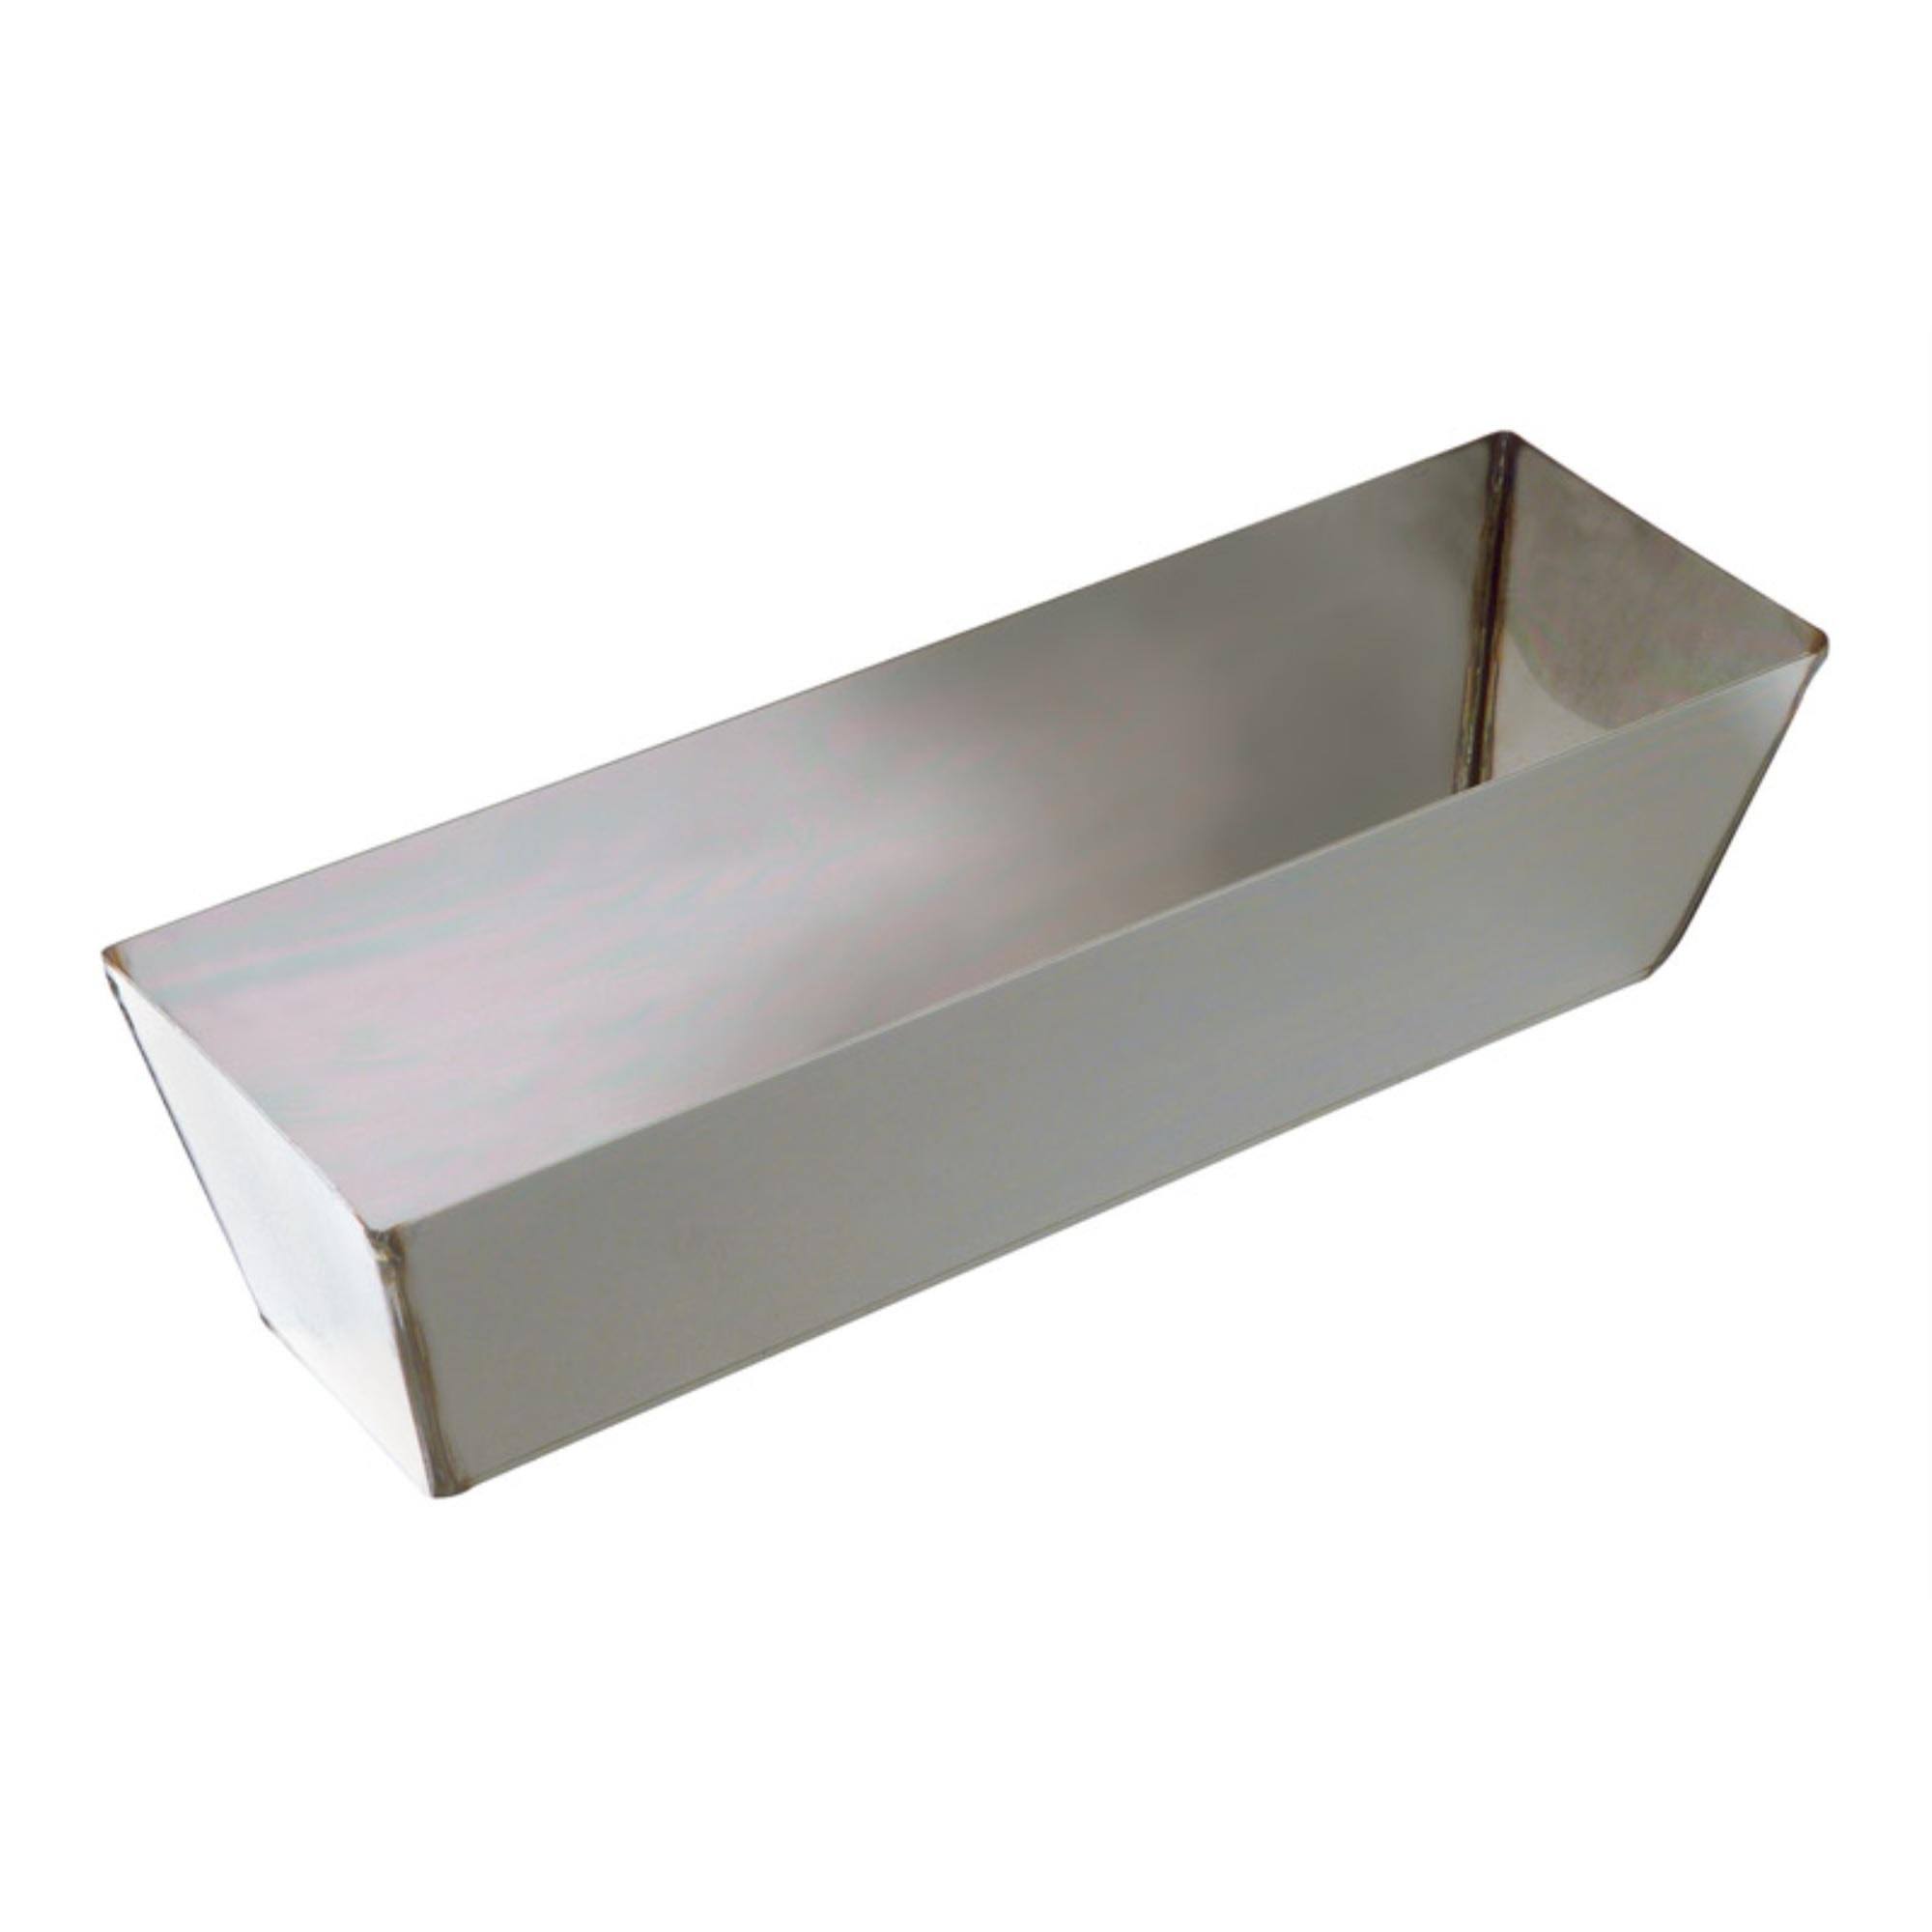 Hyde 09012 Joint Compound Mud Pan - Stainless Steel, 12"